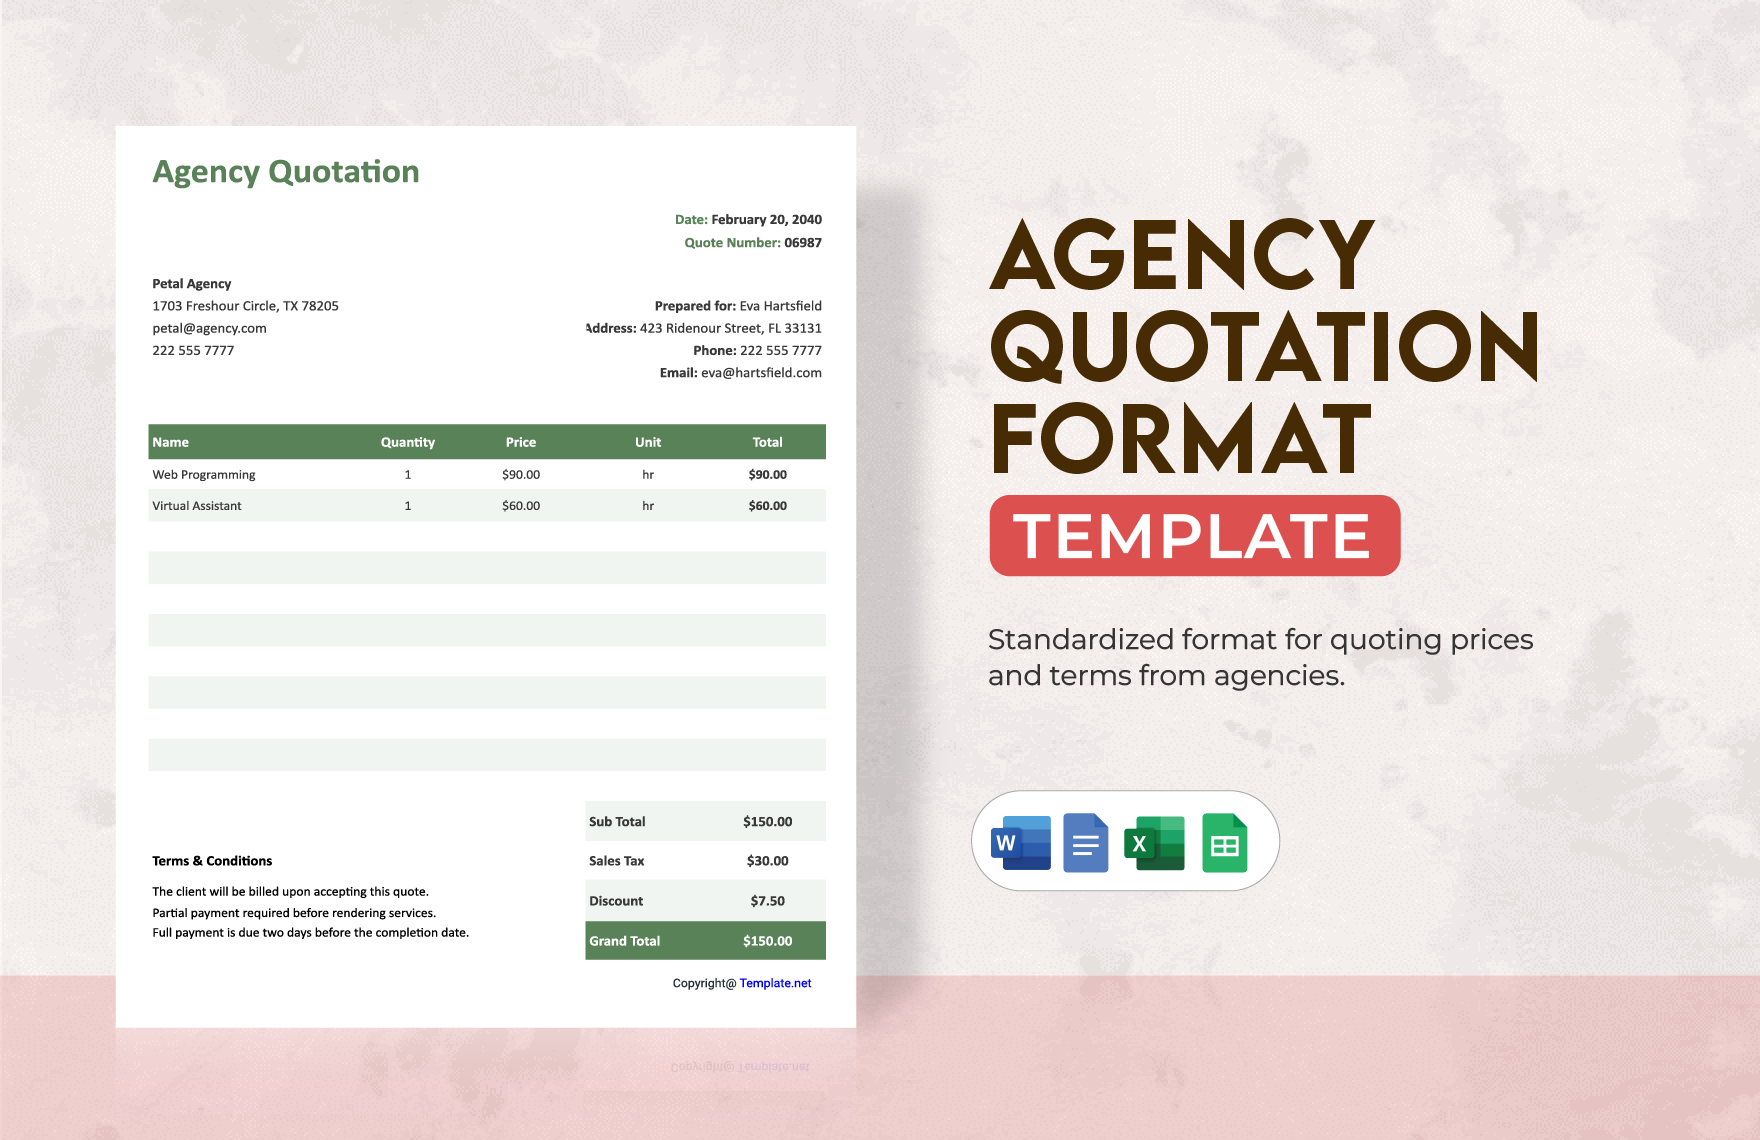 Free Agency Quotation Format Template in Word, Google Docs, Excel, Google Sheets